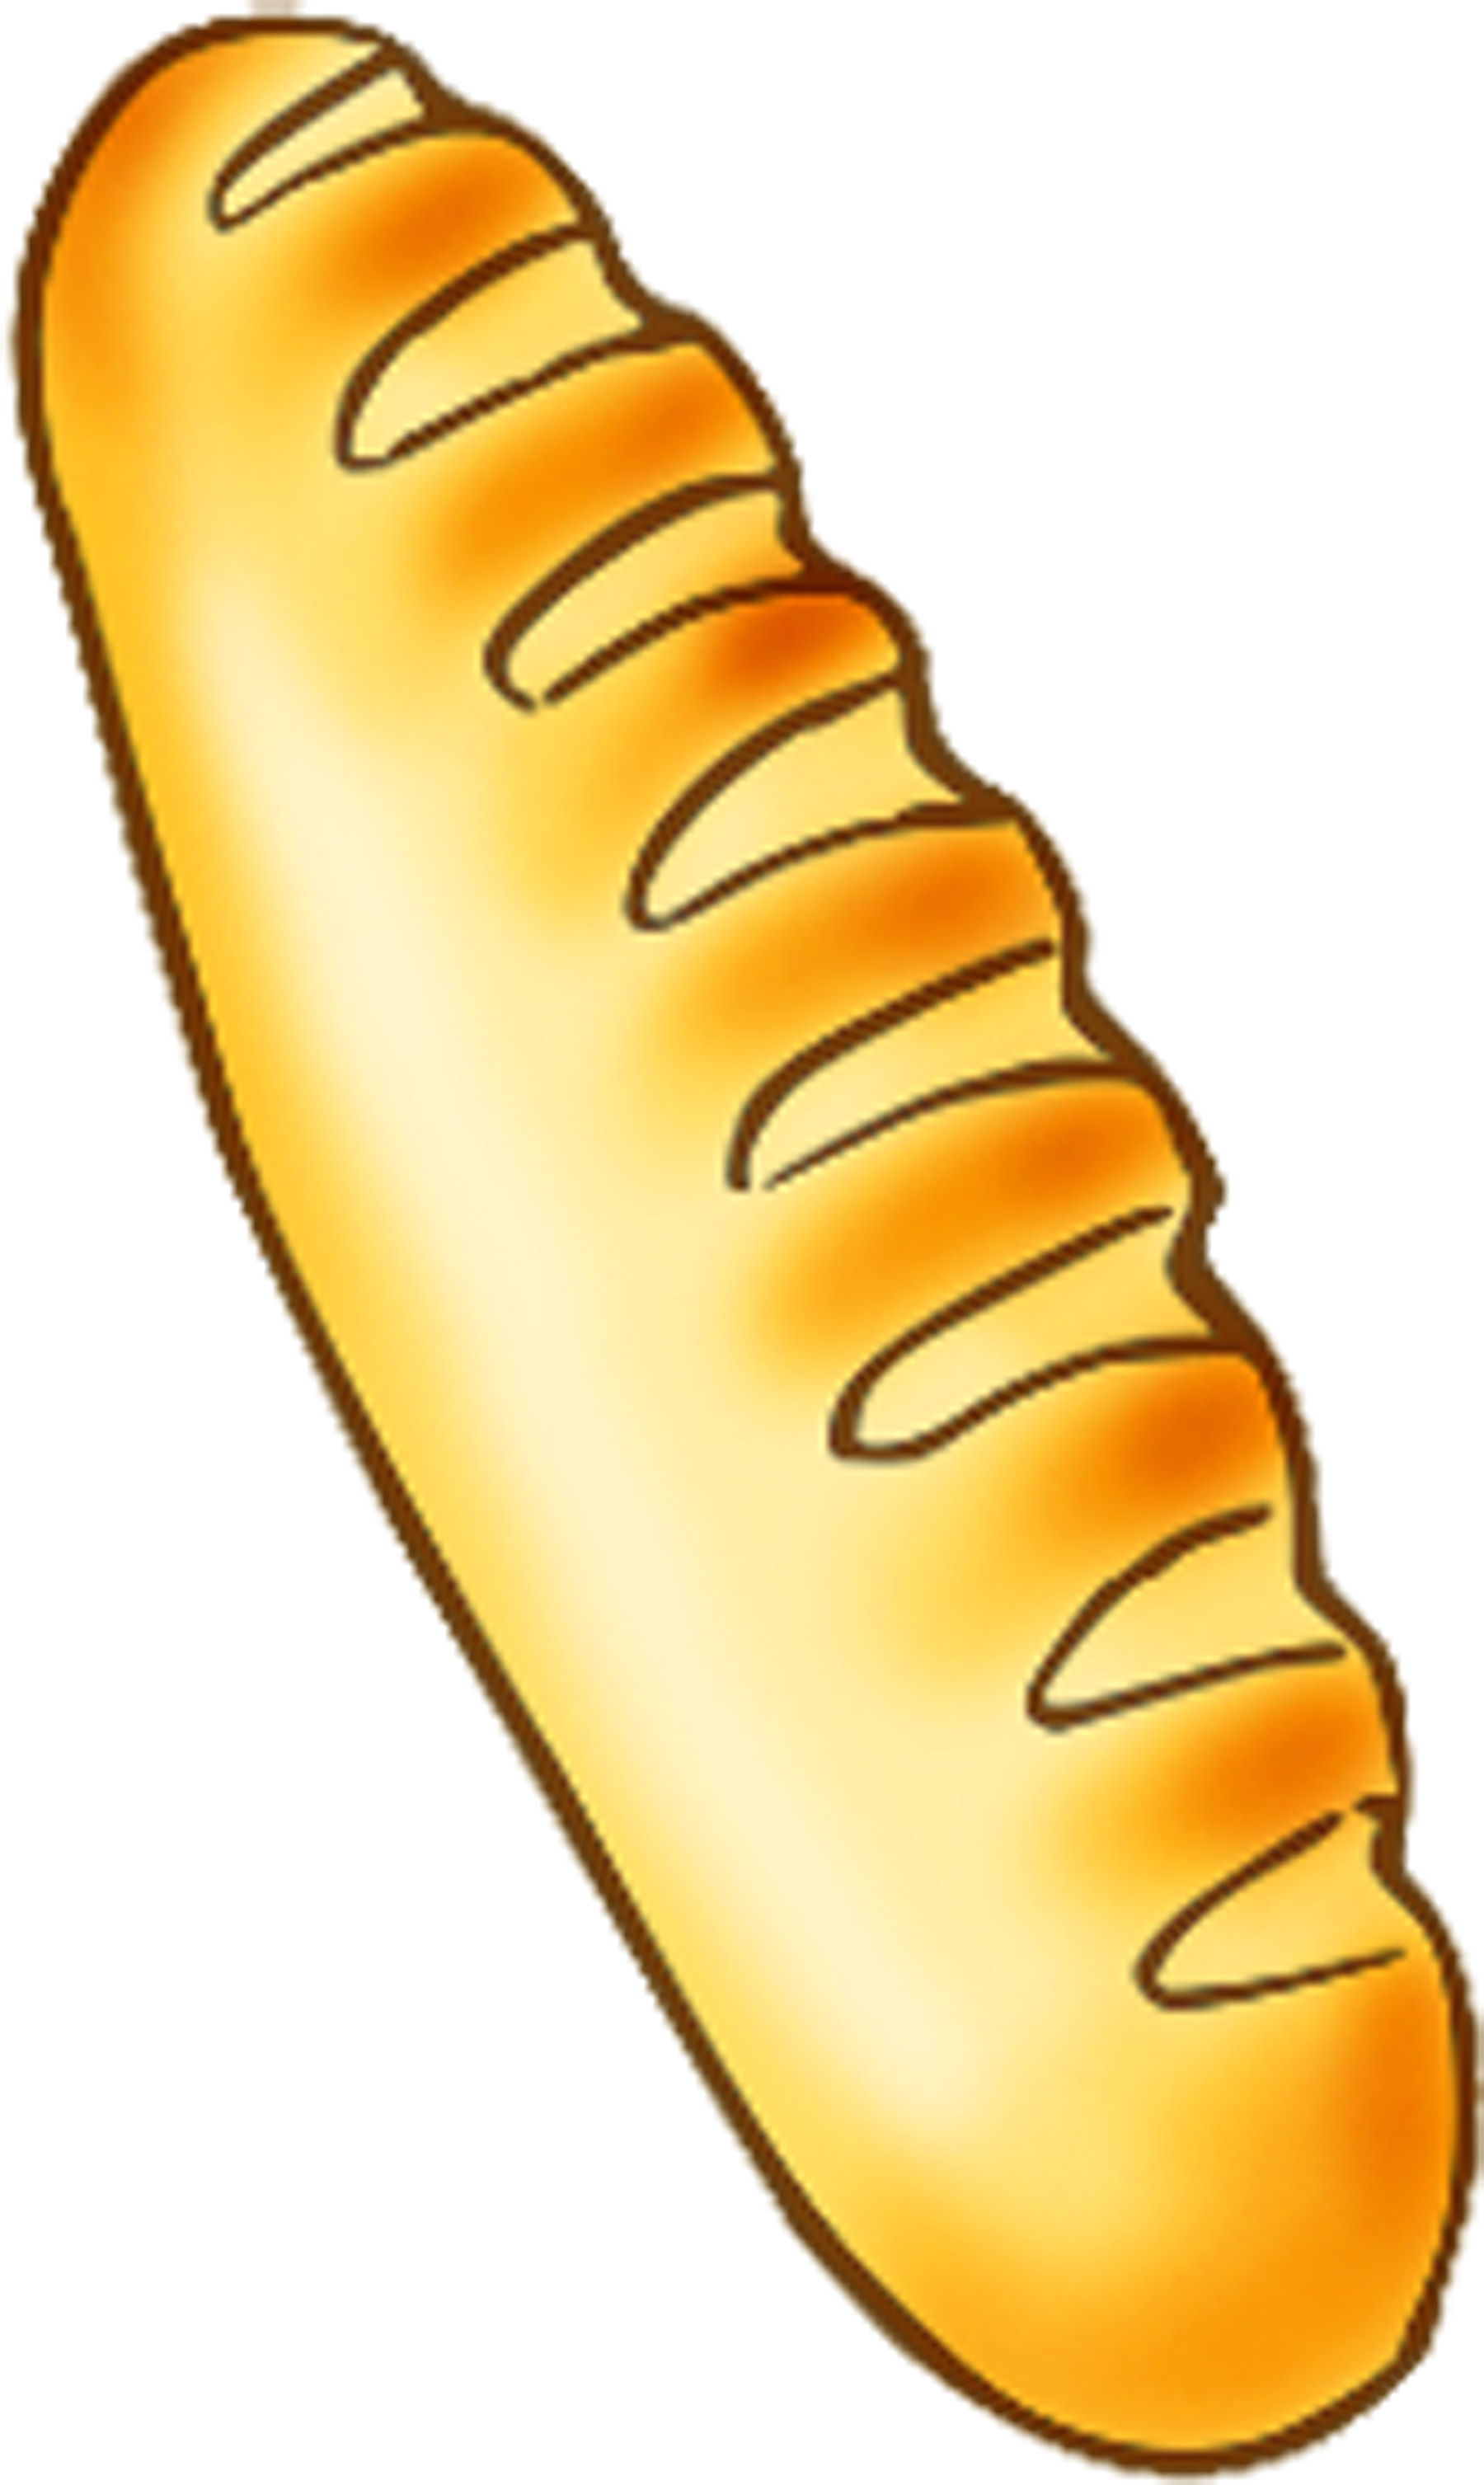 Loaf of bread free bread clipart 3 pages of public domain clip art ...